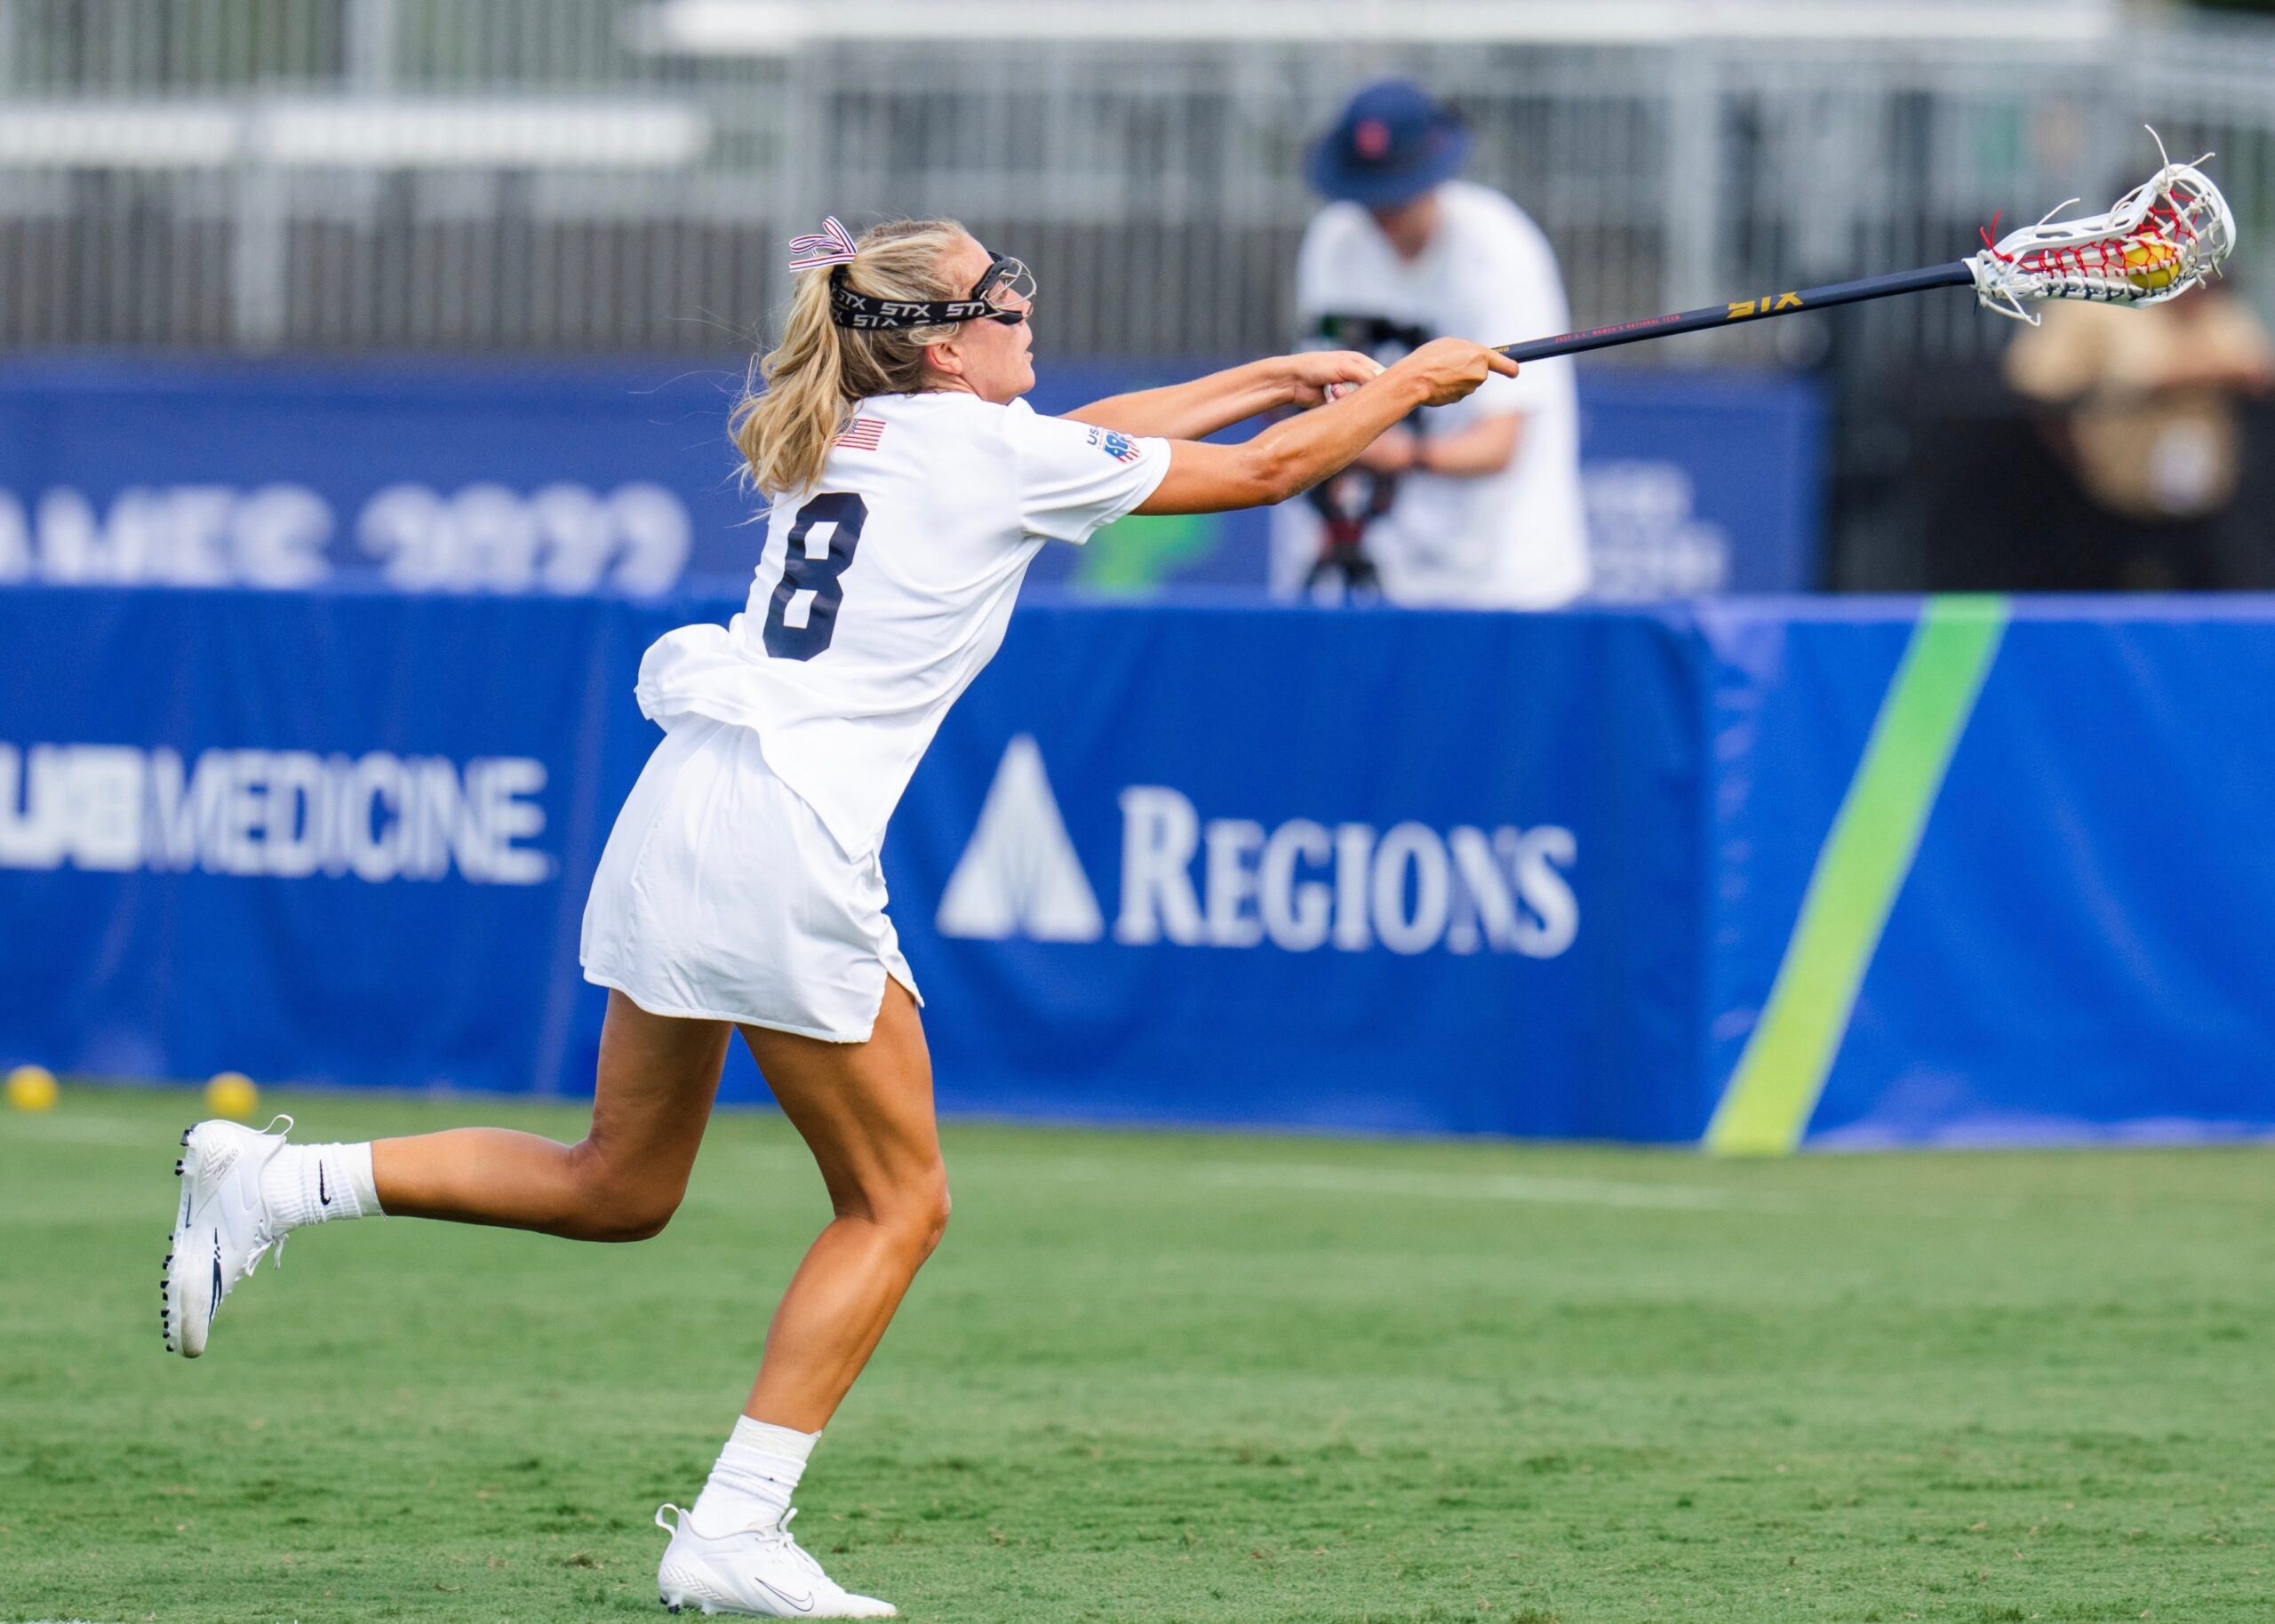 Westhampton Beach alumna Belle Smith catches the ball for Team USA. USA Lacrosse